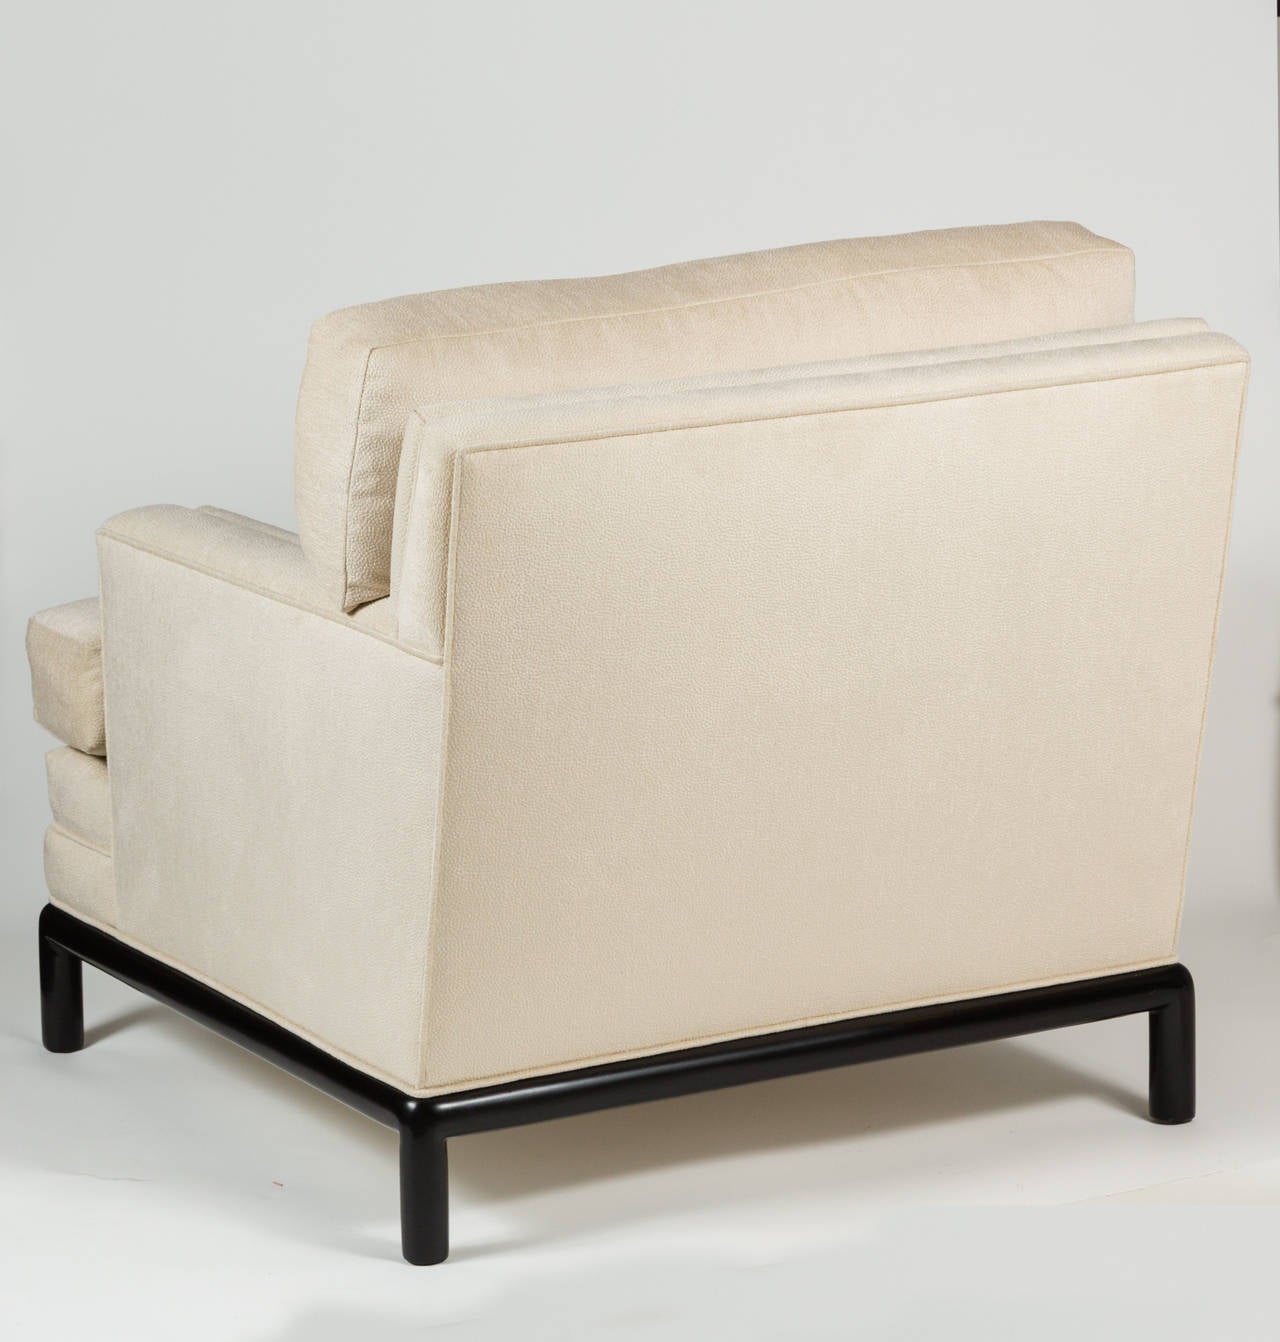 Elegant pair of armchairs with ebony lacquered wood bases and new upholstery in a cream, textured fabric. Graceful lines contribute to the desirable and welcoming design. Cushions have a feather/ down content, giving them a luxurious feel.